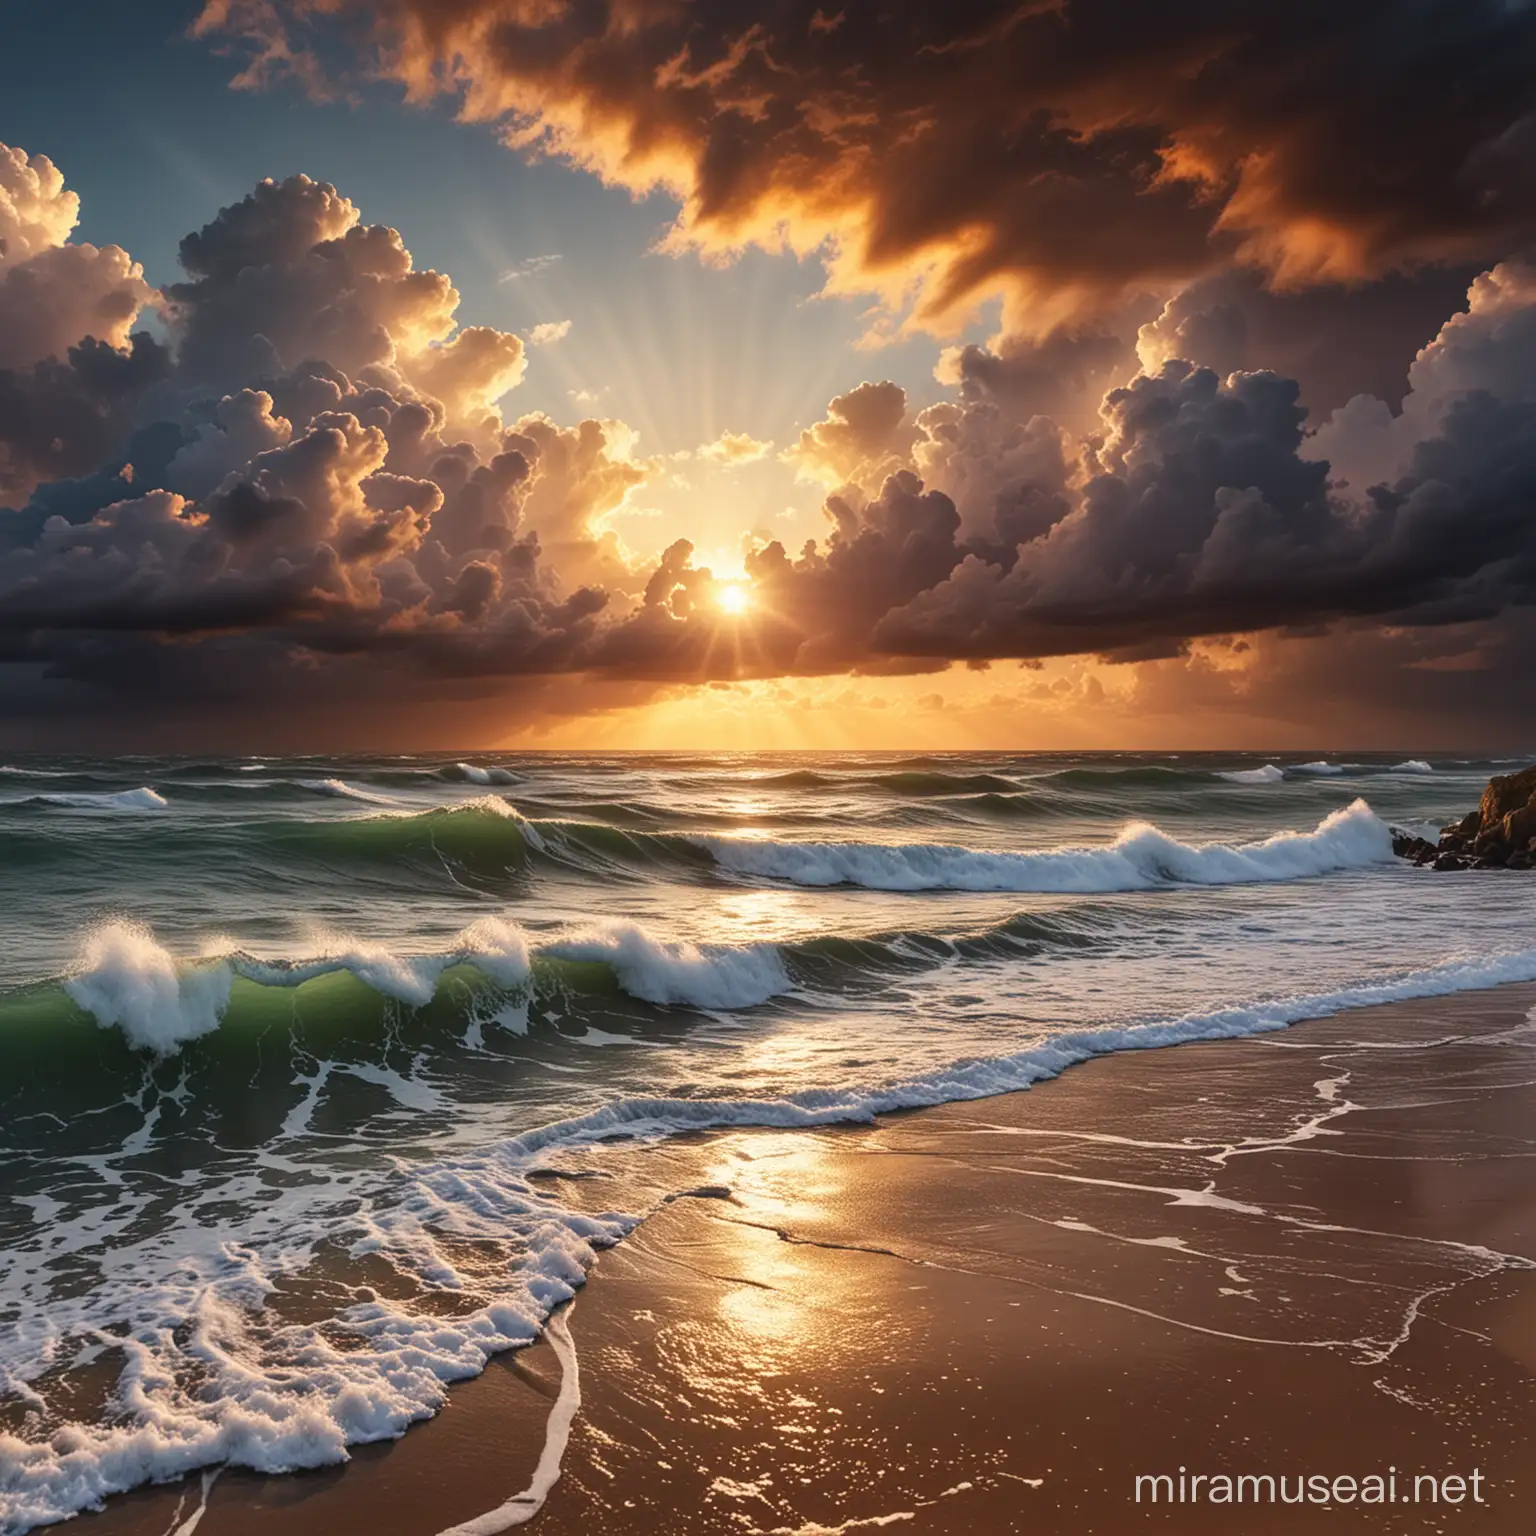 create a picture of a sunset over the ocean waves with storm clouds rolling out, light coming through the storms, and a path in the clouds